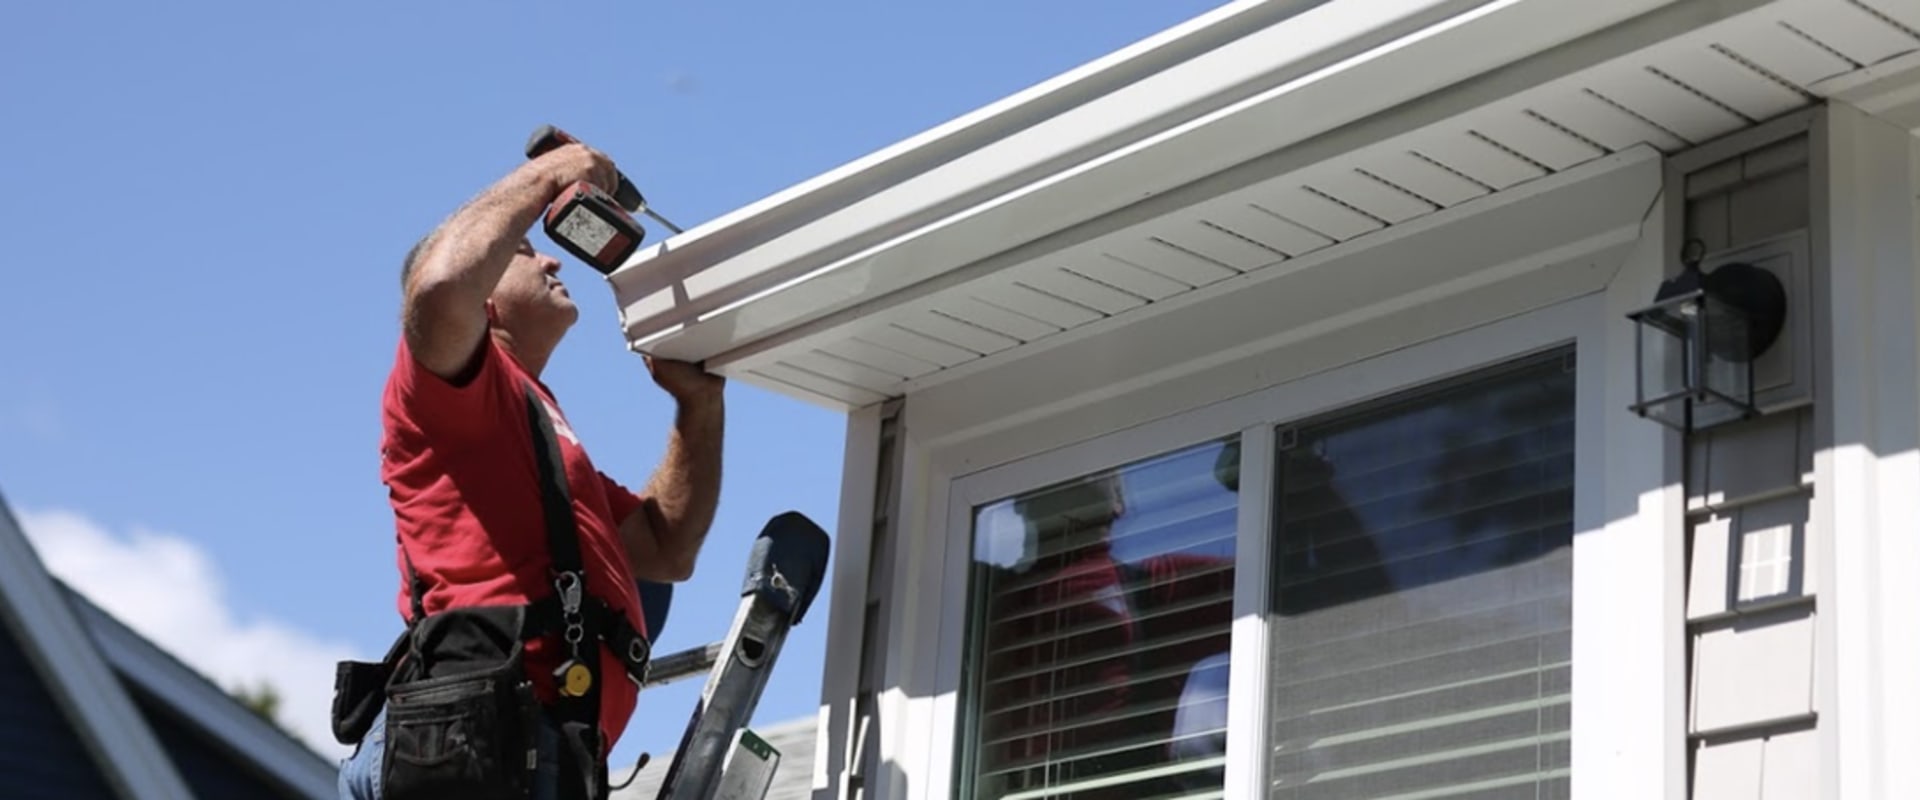 Gutter Installation and Repair Services in Suffolk County, NY - Get Professional Help Now!